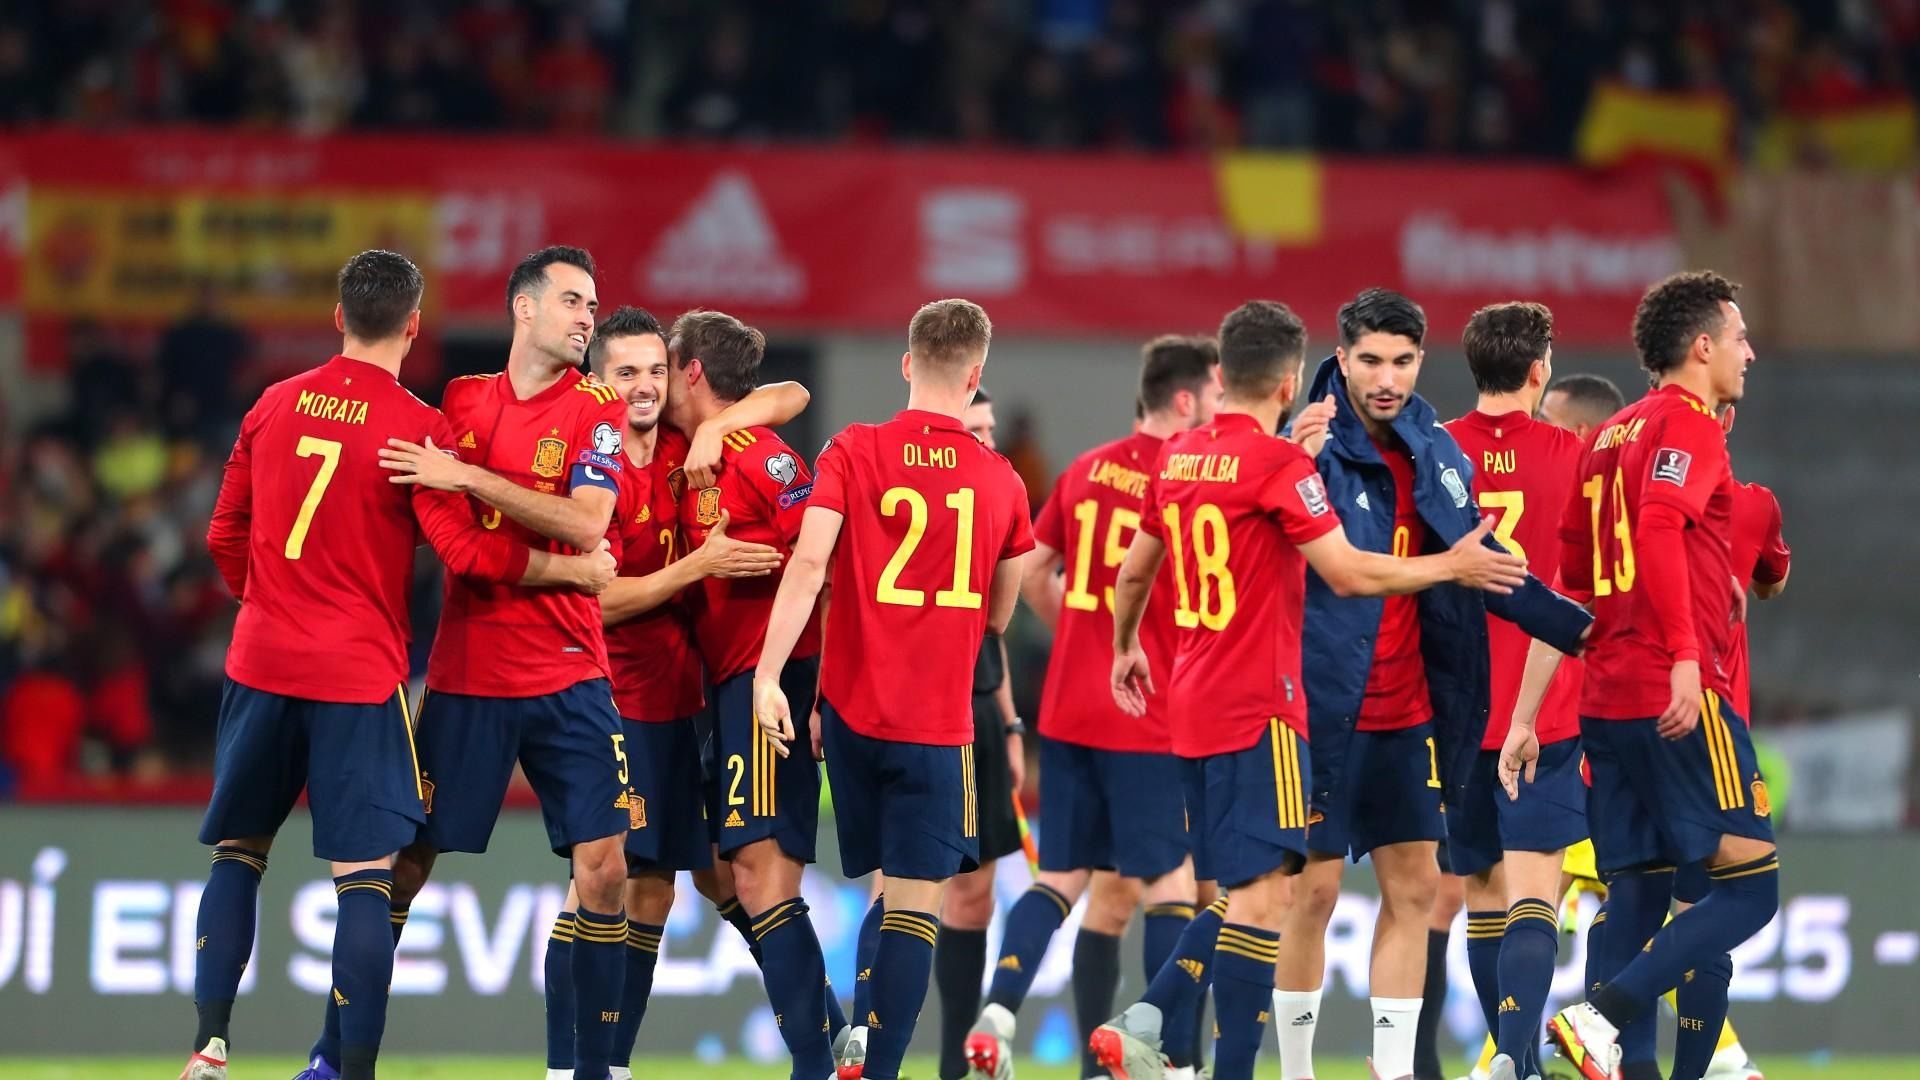 Spain's De La Fuente Optimistic Following Victory Over Italy: “I Don’t Know Where Our Ceiling Is”